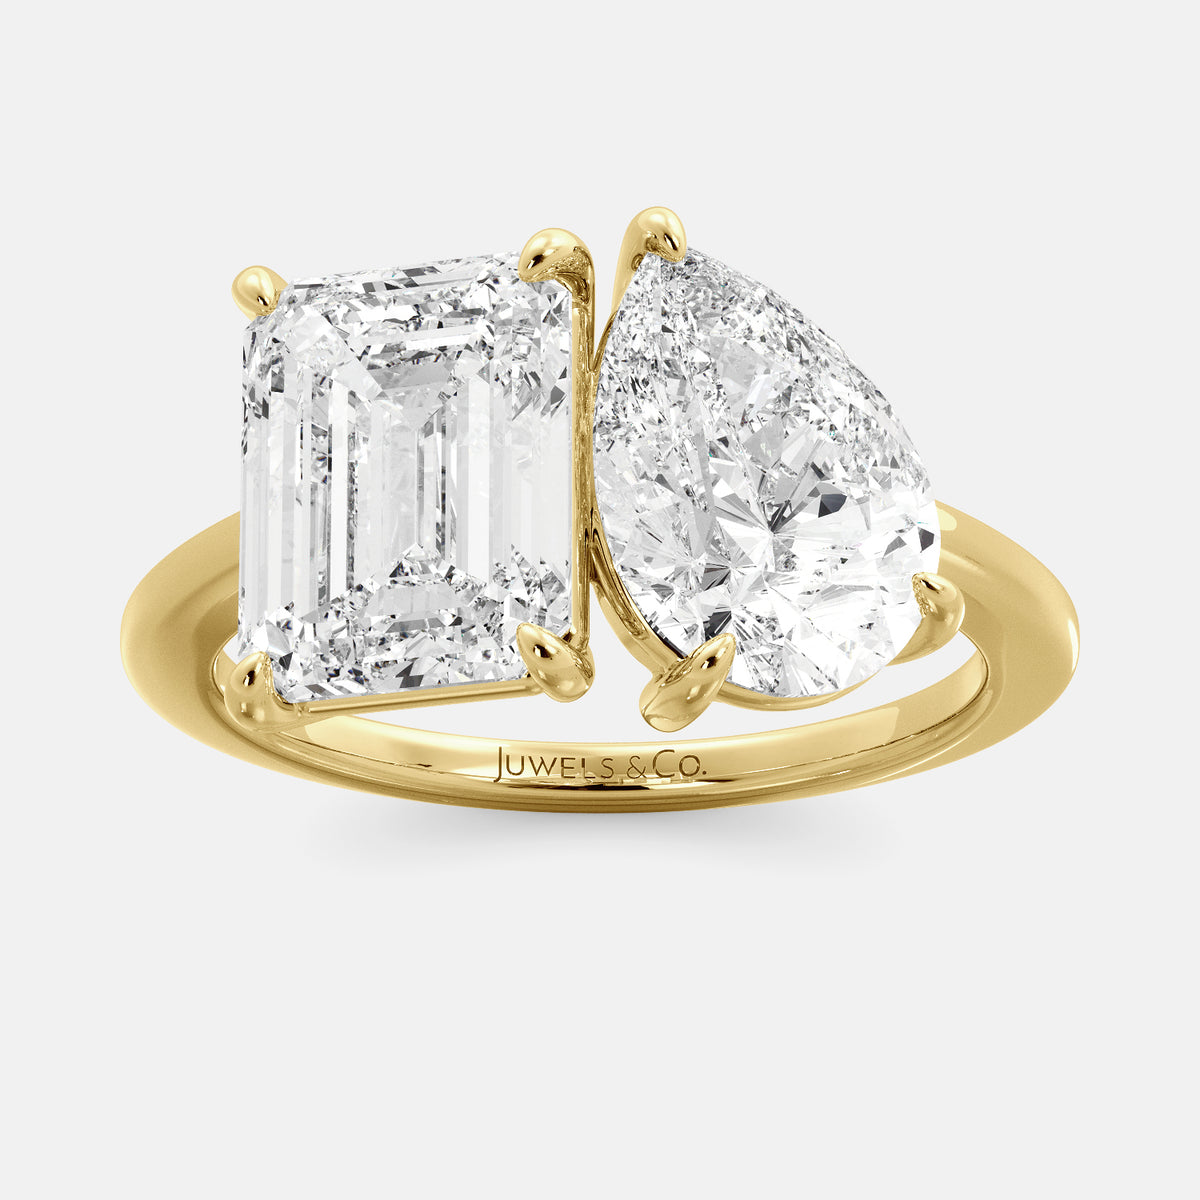 The Toi et Moi Diamond Ring: A Symbol of Love in Two Stones